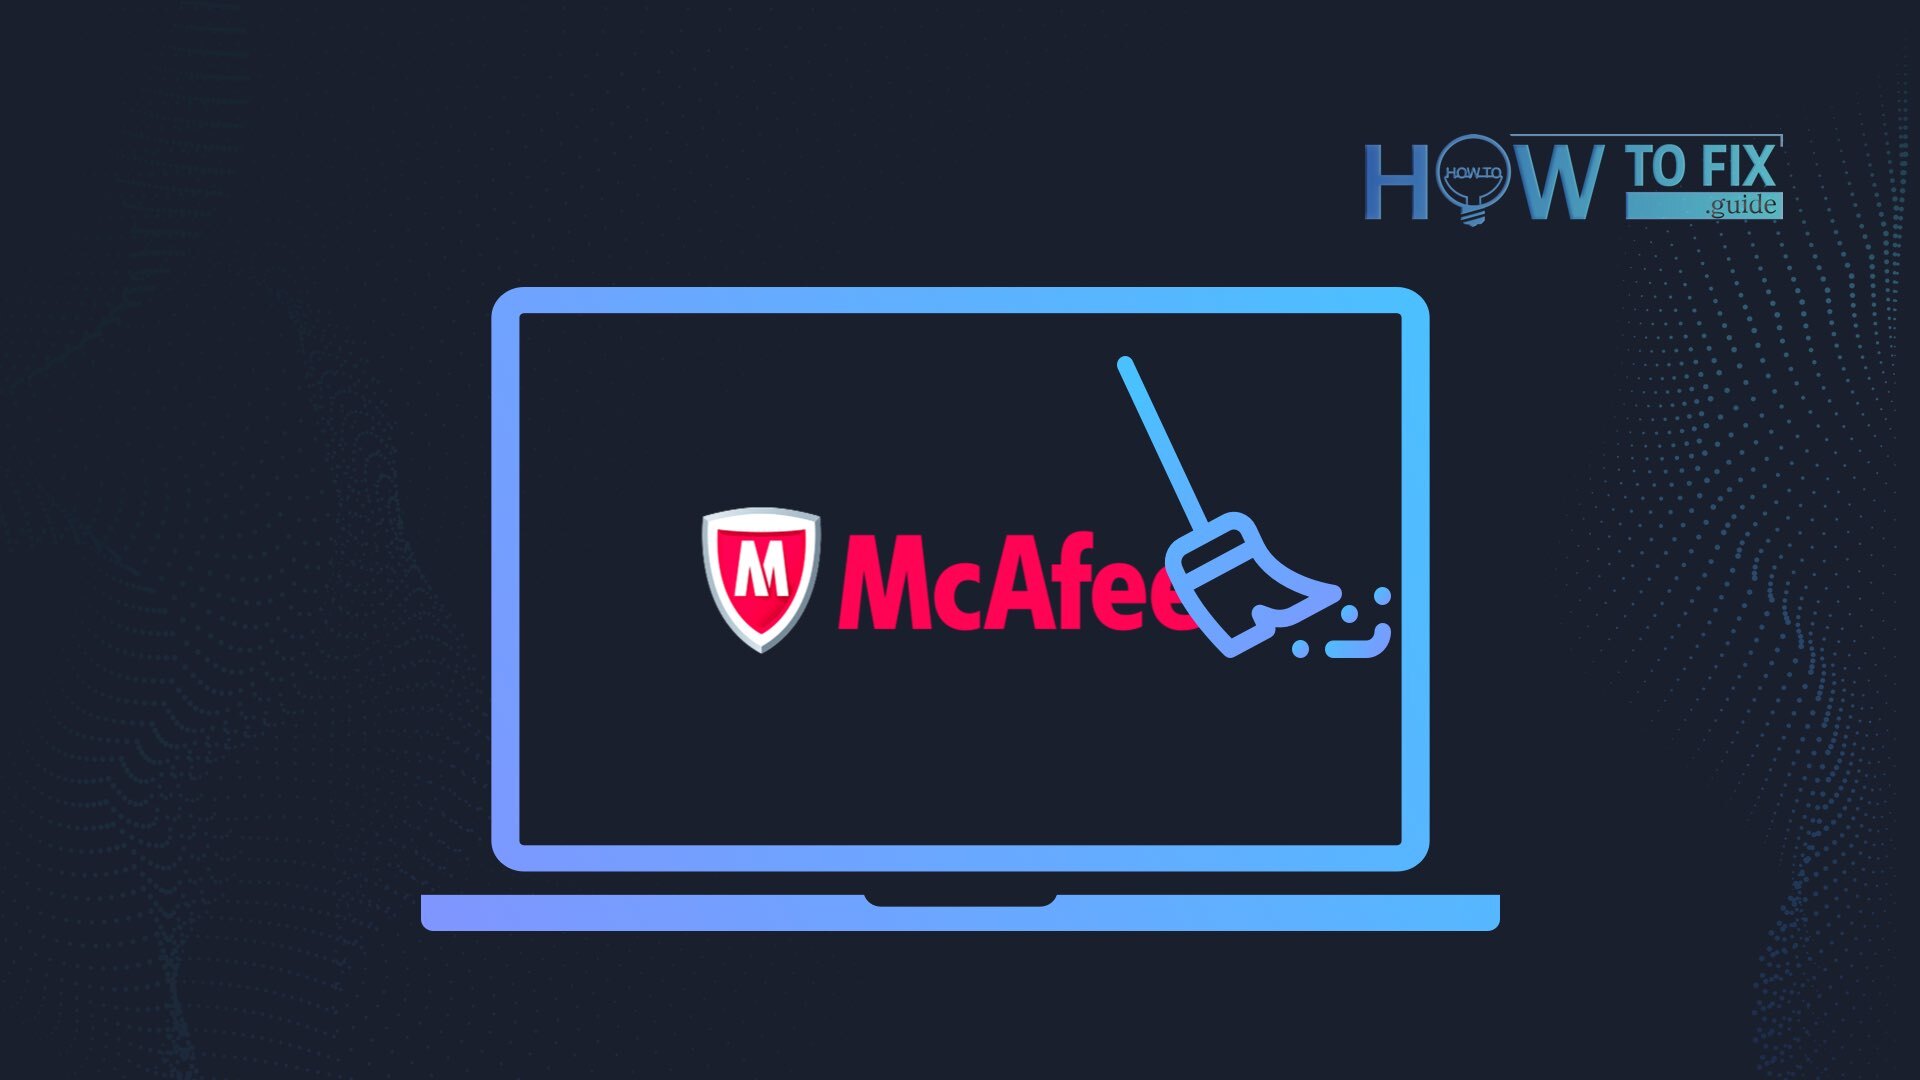 Removing McAfee from your PC